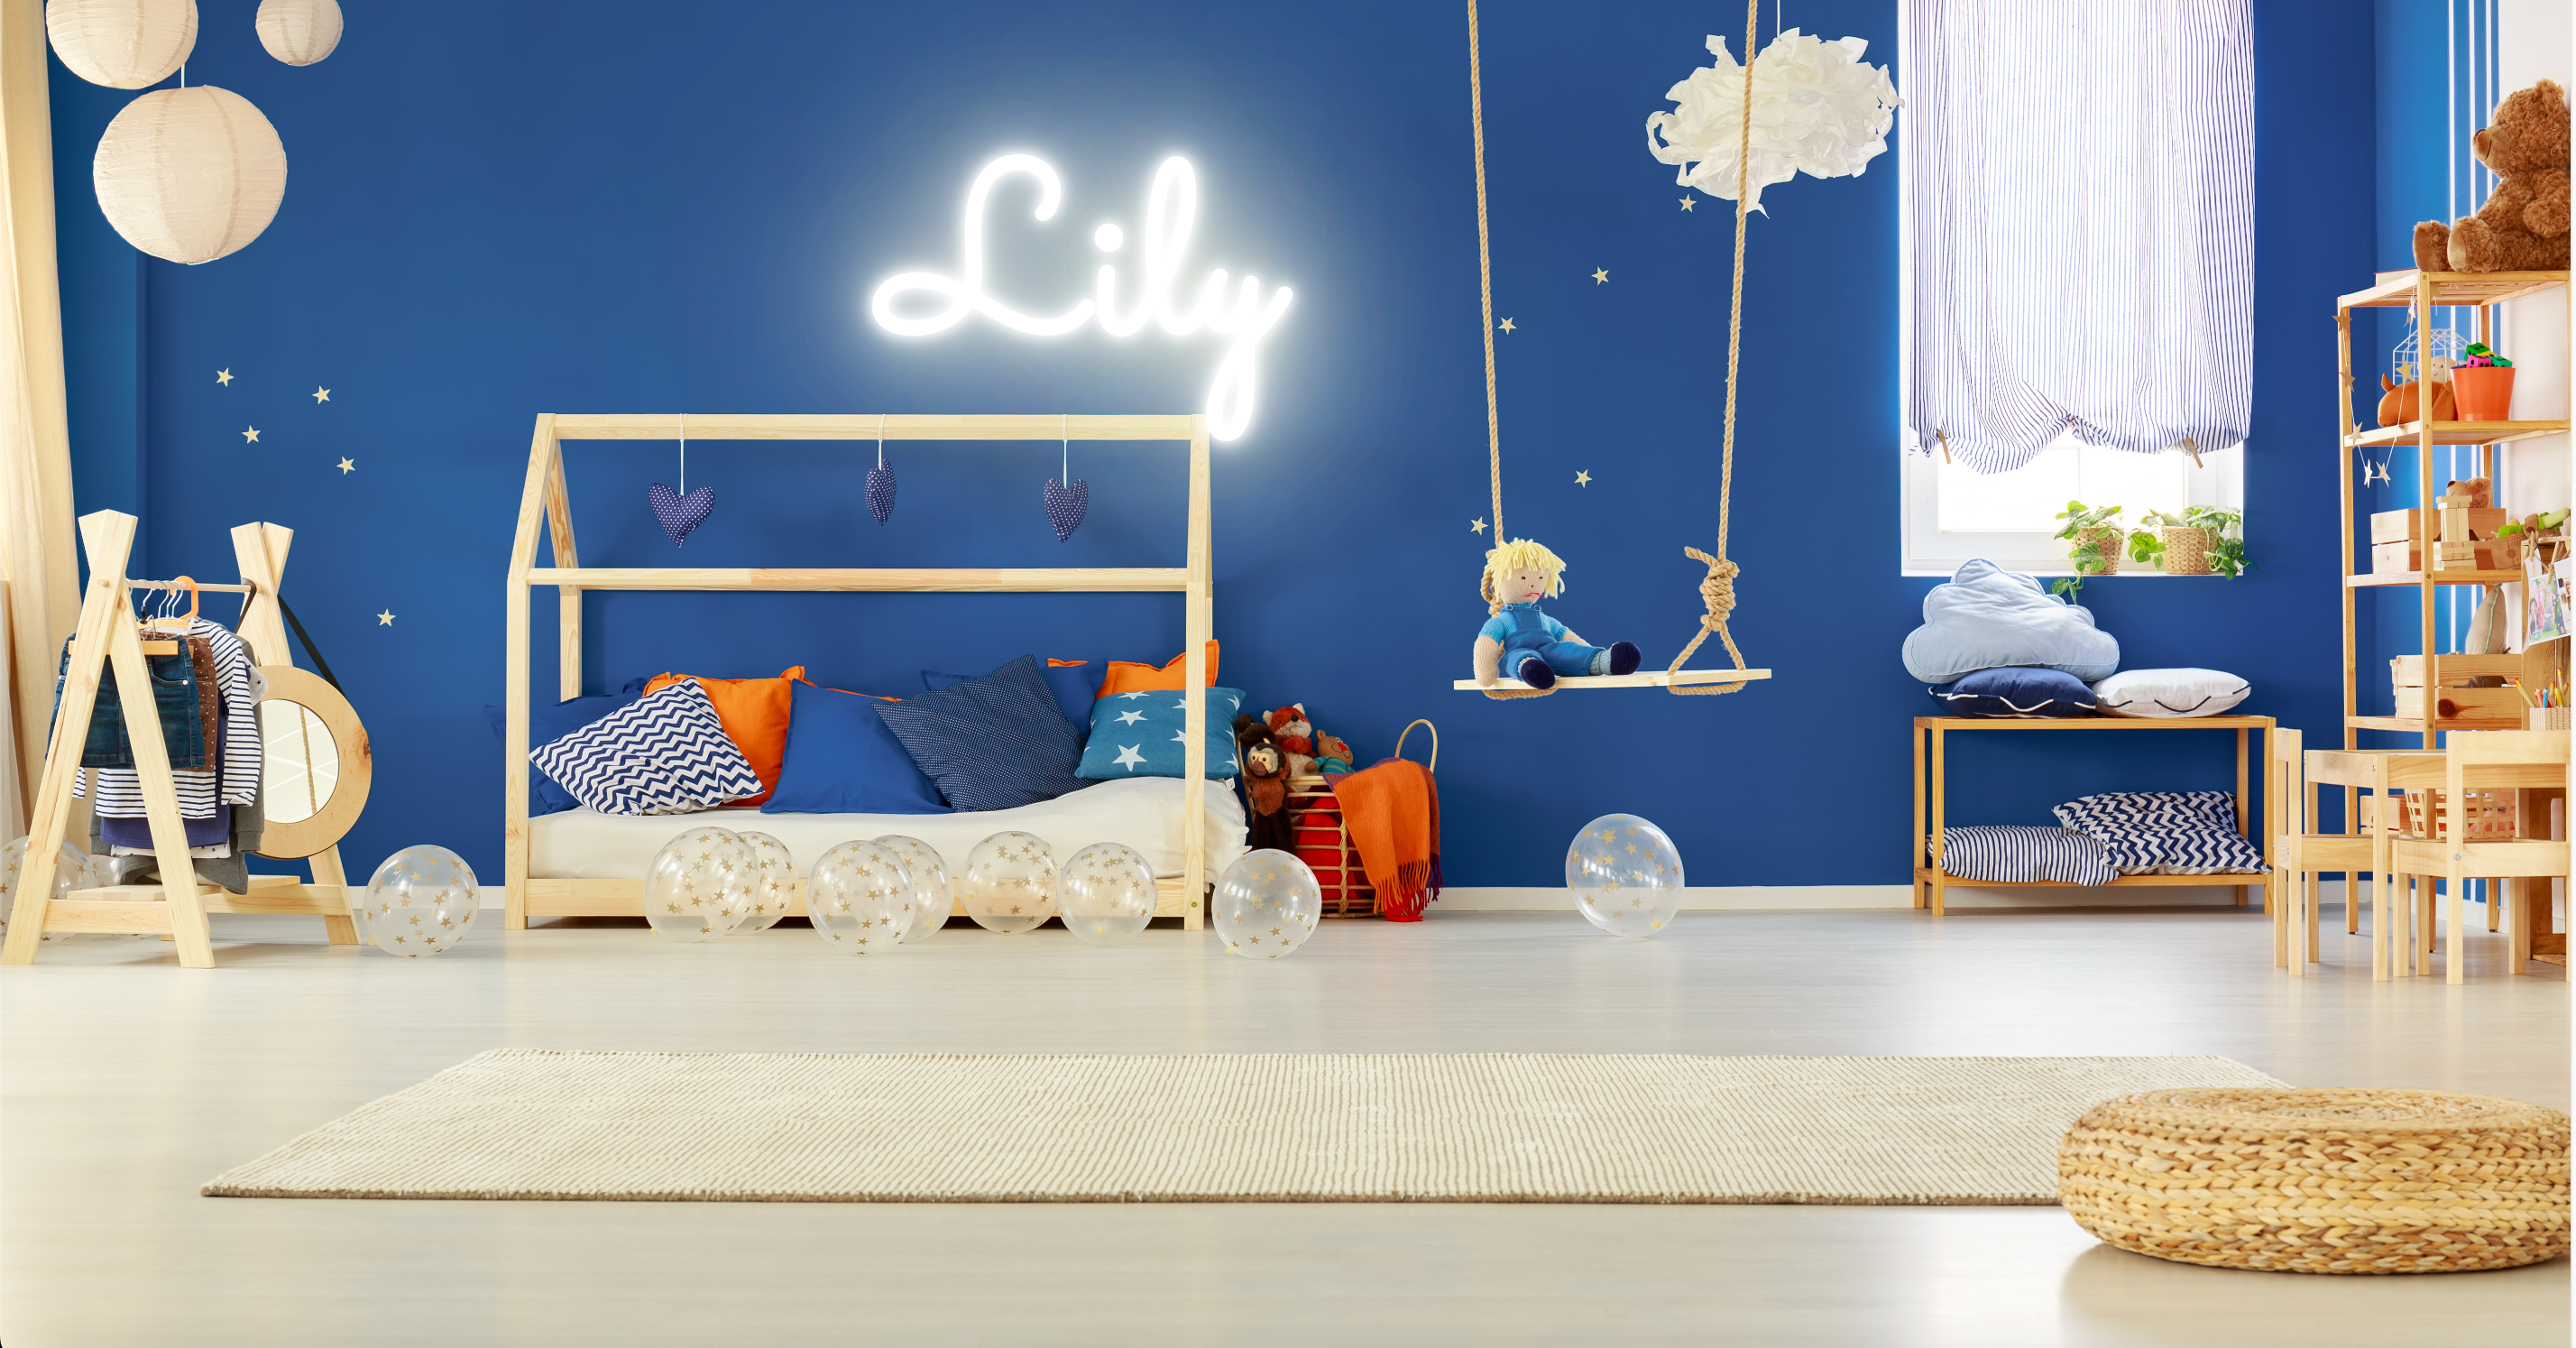 "Lily" Baby Name LED Neon Sign